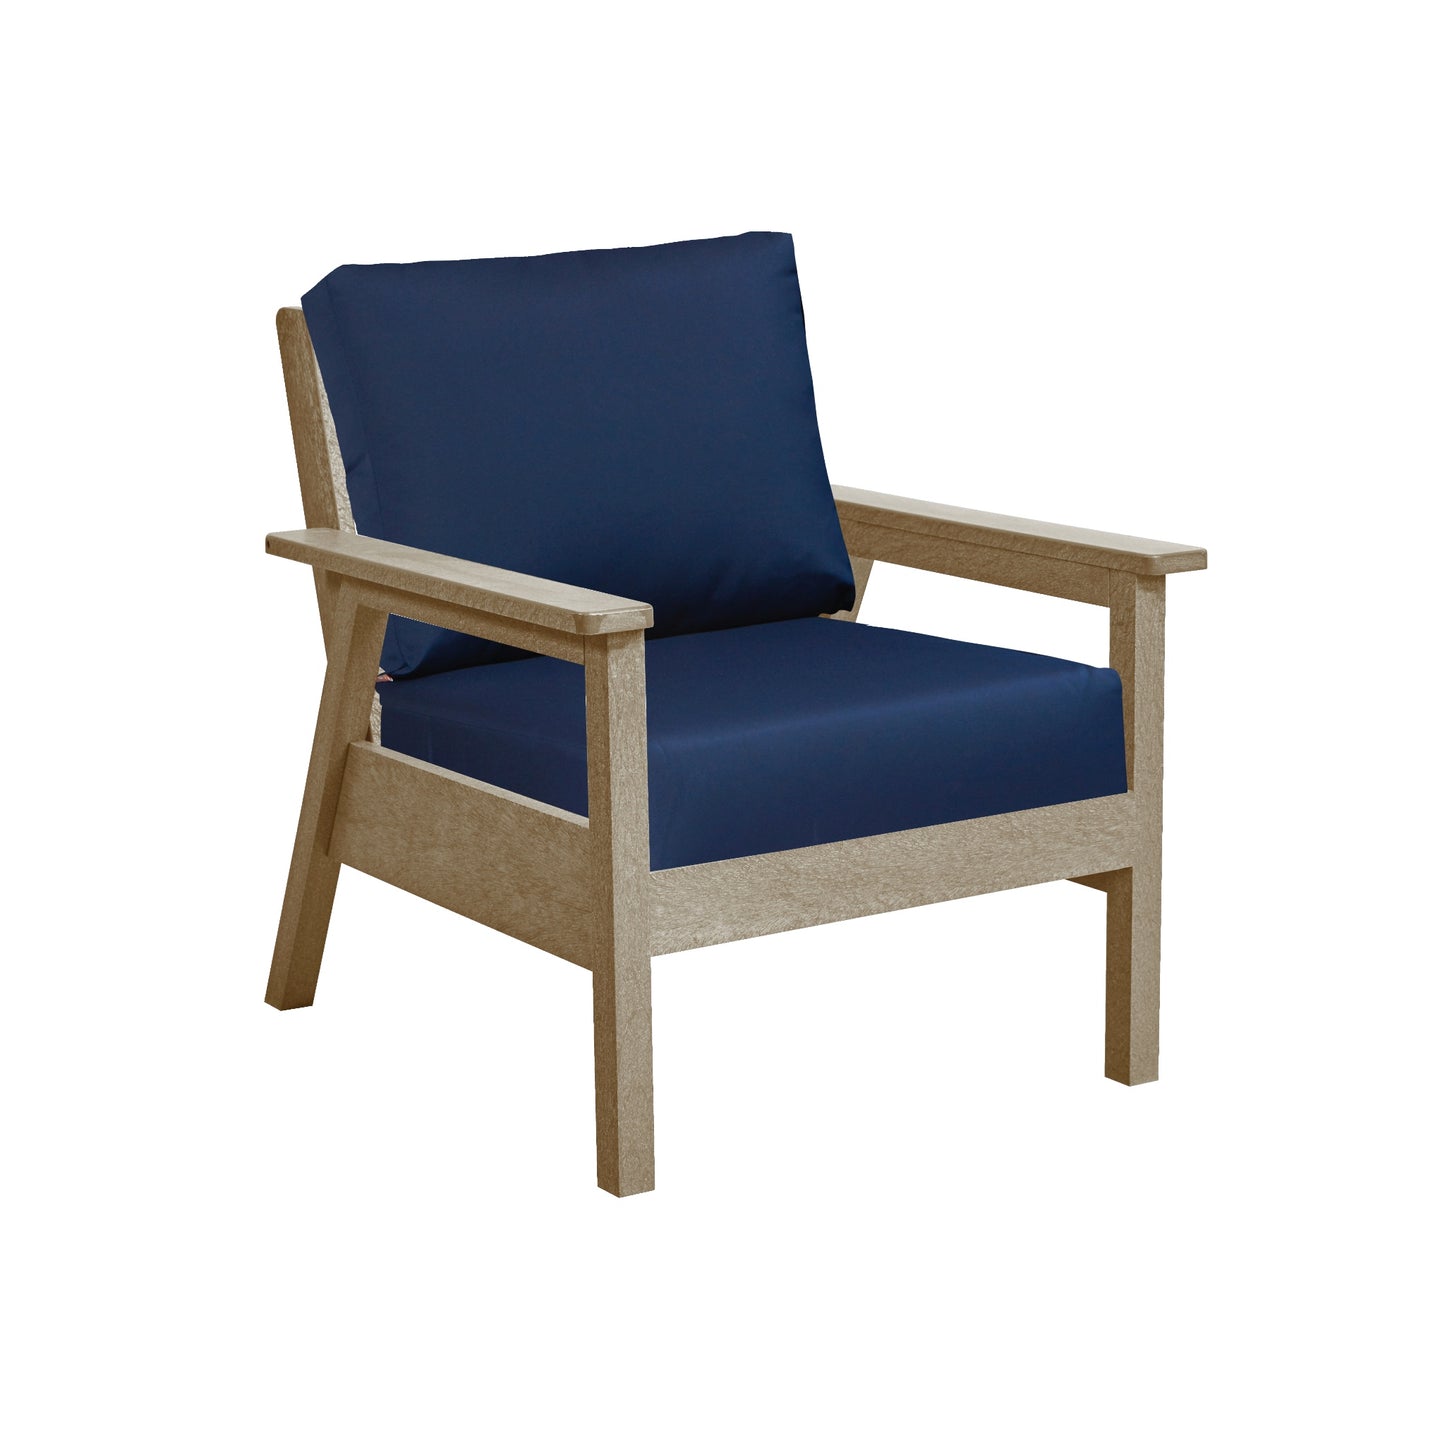 Tofino Chair BEIGE FRAME WITH CUSHIONS - DSF281 [DSF241}